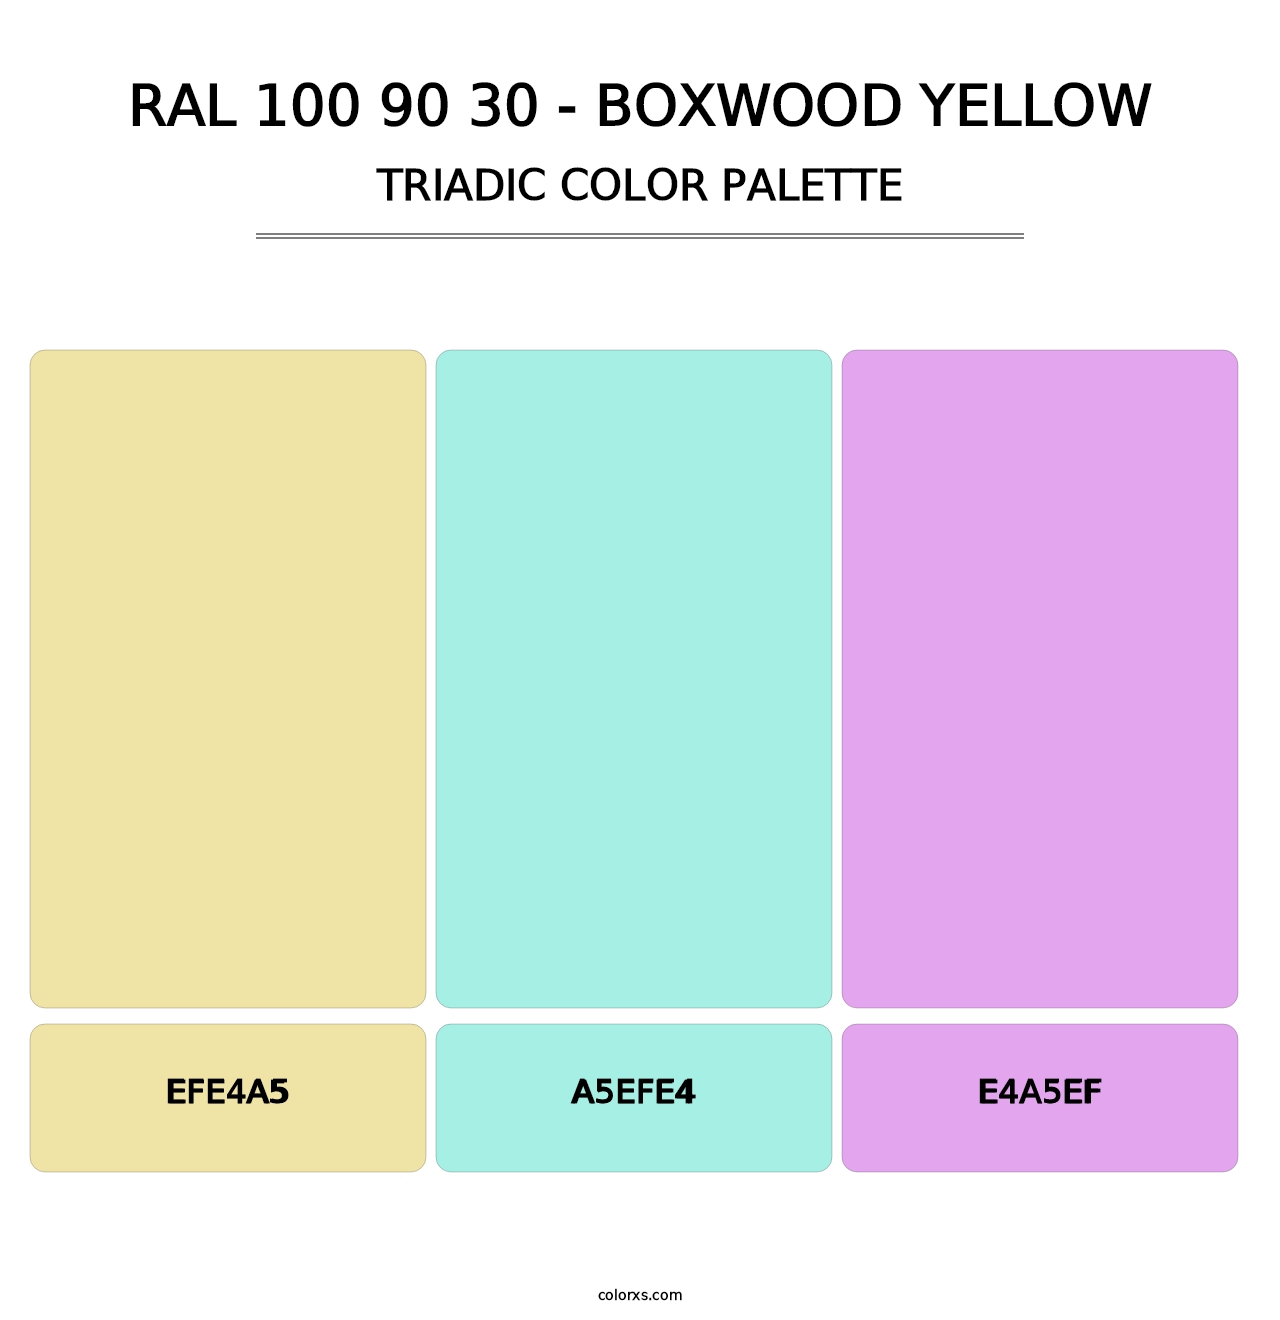 RAL 100 90 30 - Boxwood Yellow - Triadic Color Palette